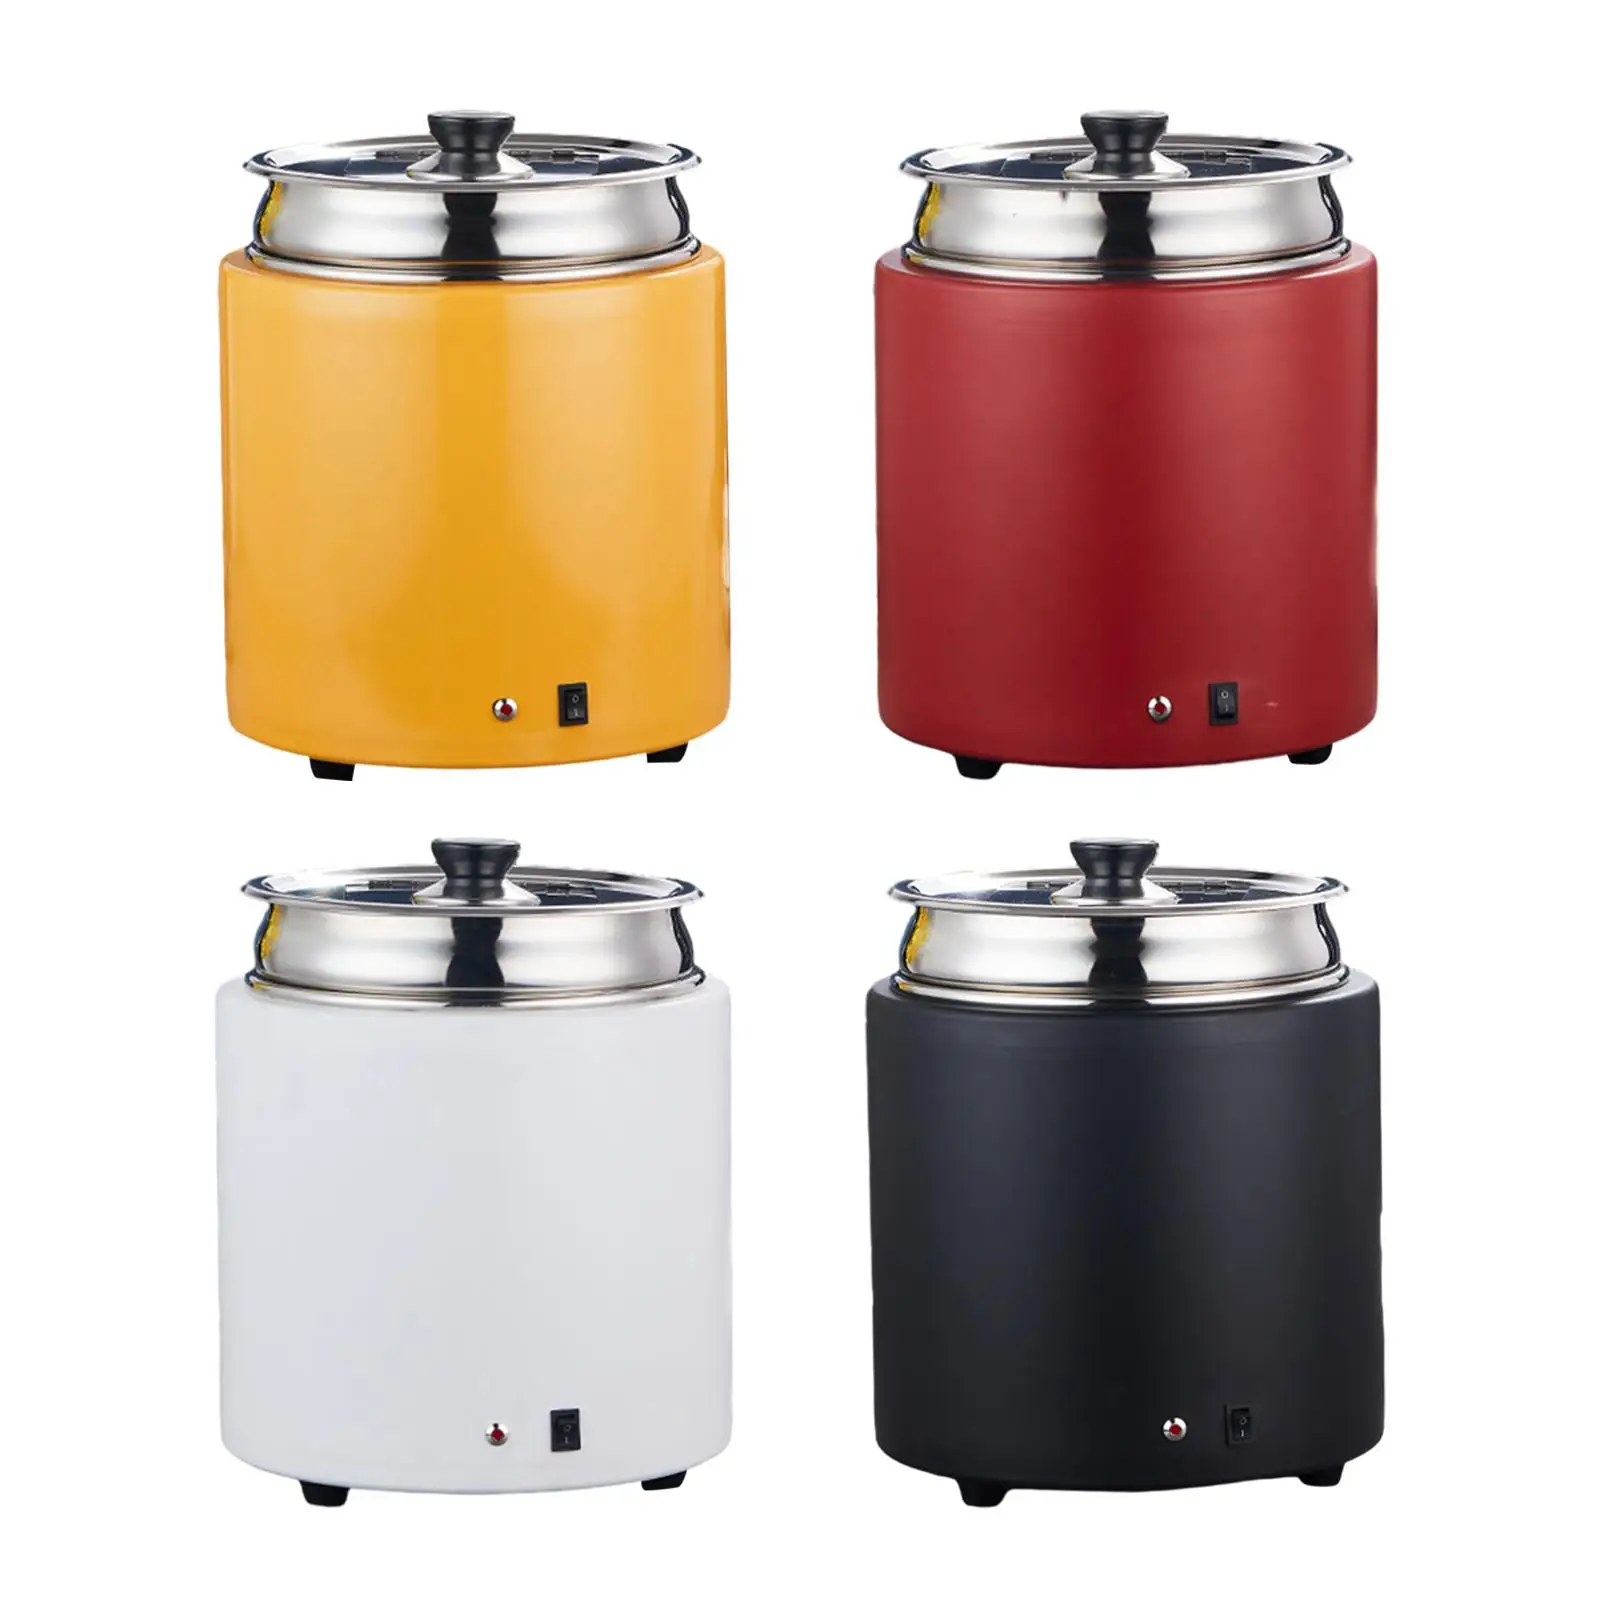 Stainless Steel Electric Soup Pot Multifunctional Kitchen Tool Insulated Warm Soup Pot for Stews Porridges Making Soups Hotel